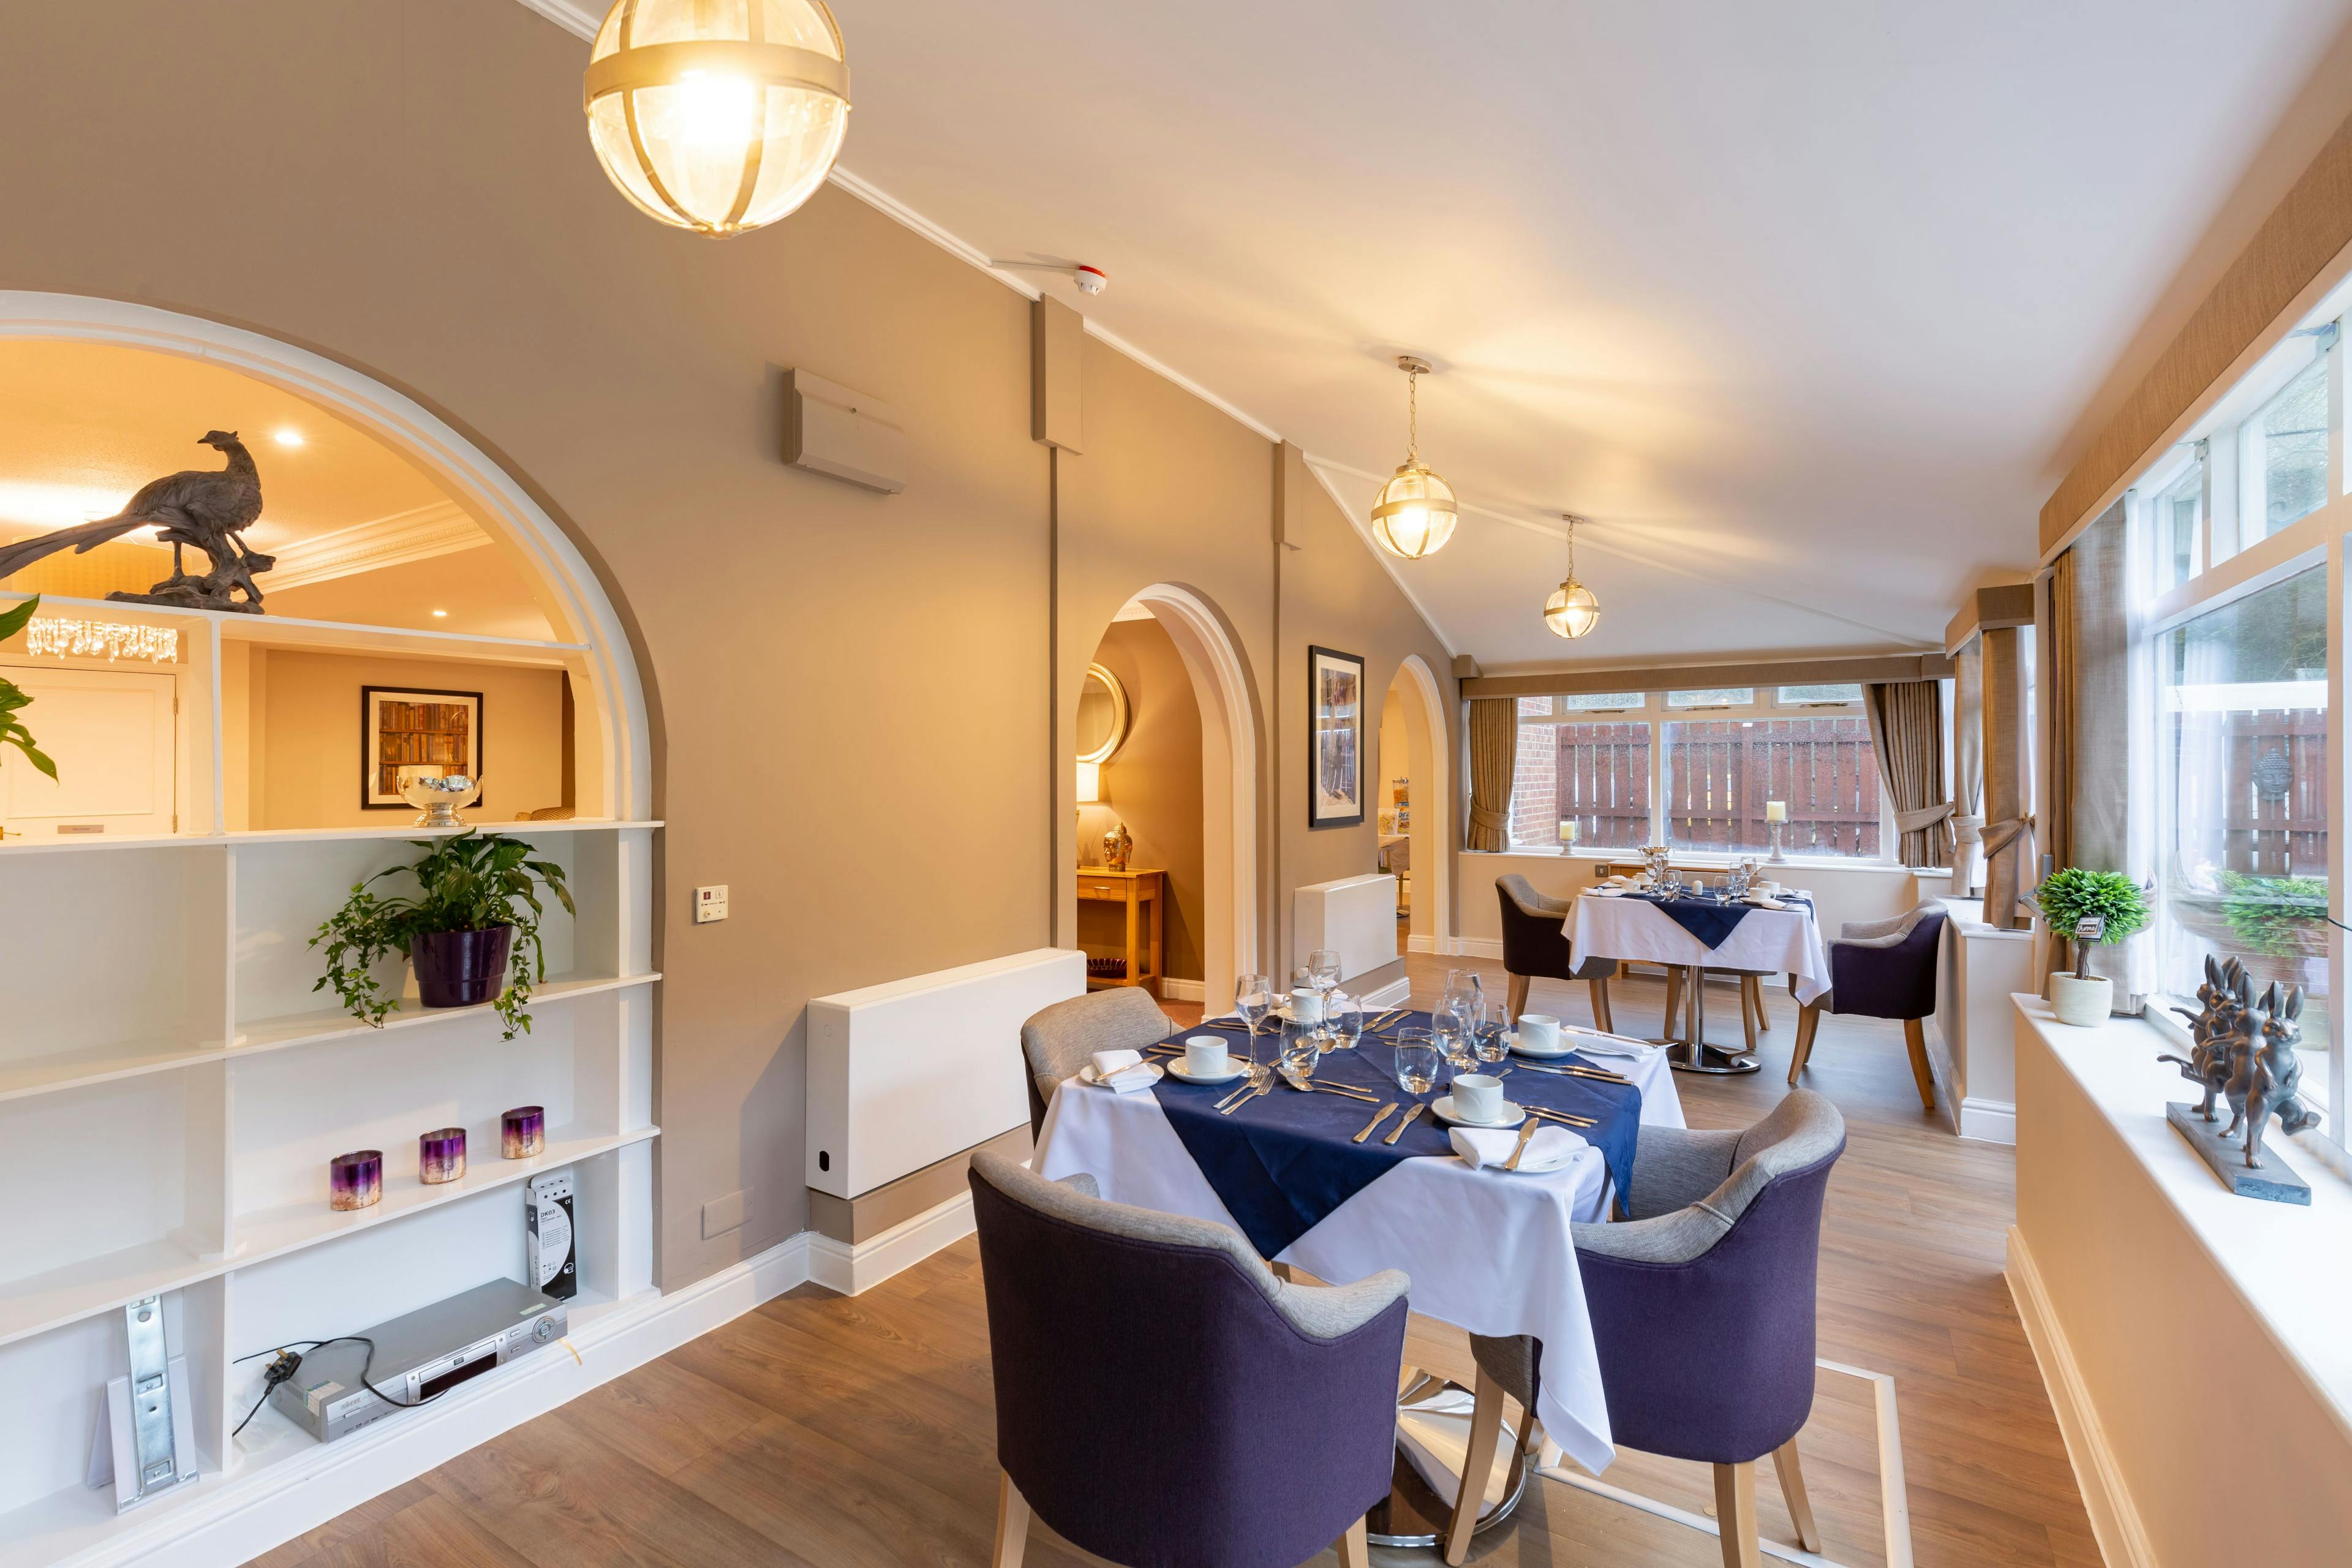 Dining Room at South Chowdene Care Home in Gateshead, Tyne and Wear